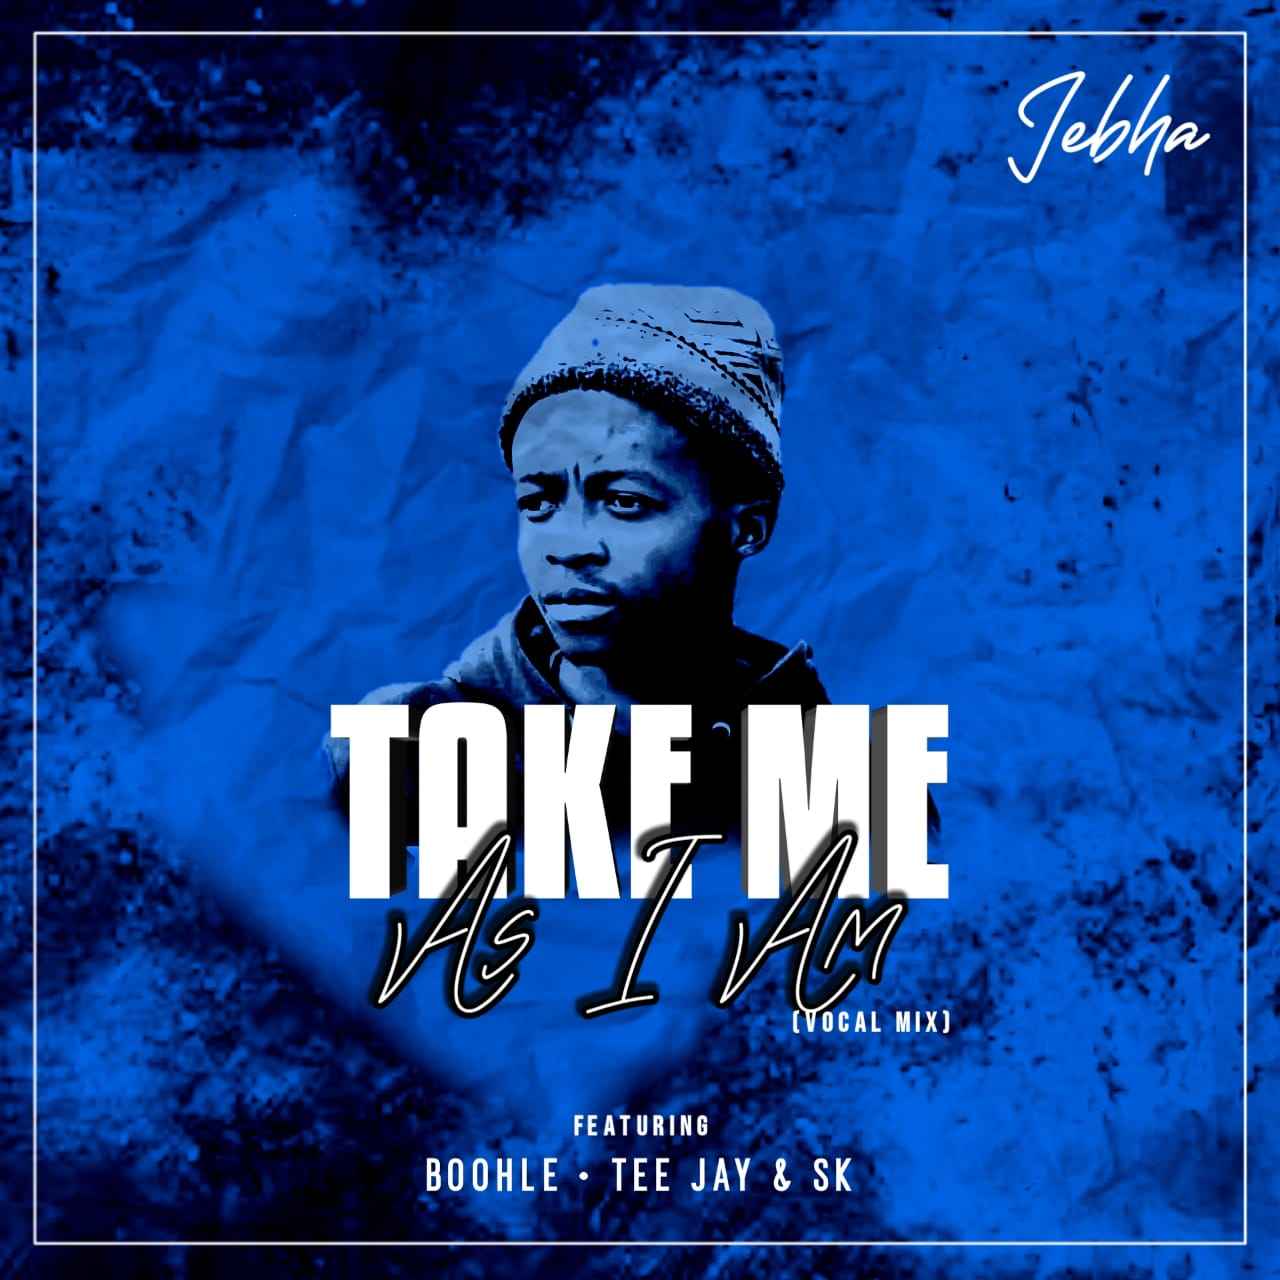 Jebha Take Me As I Am (Vocal Mix) ft Boohle, Tee Jay & Sk